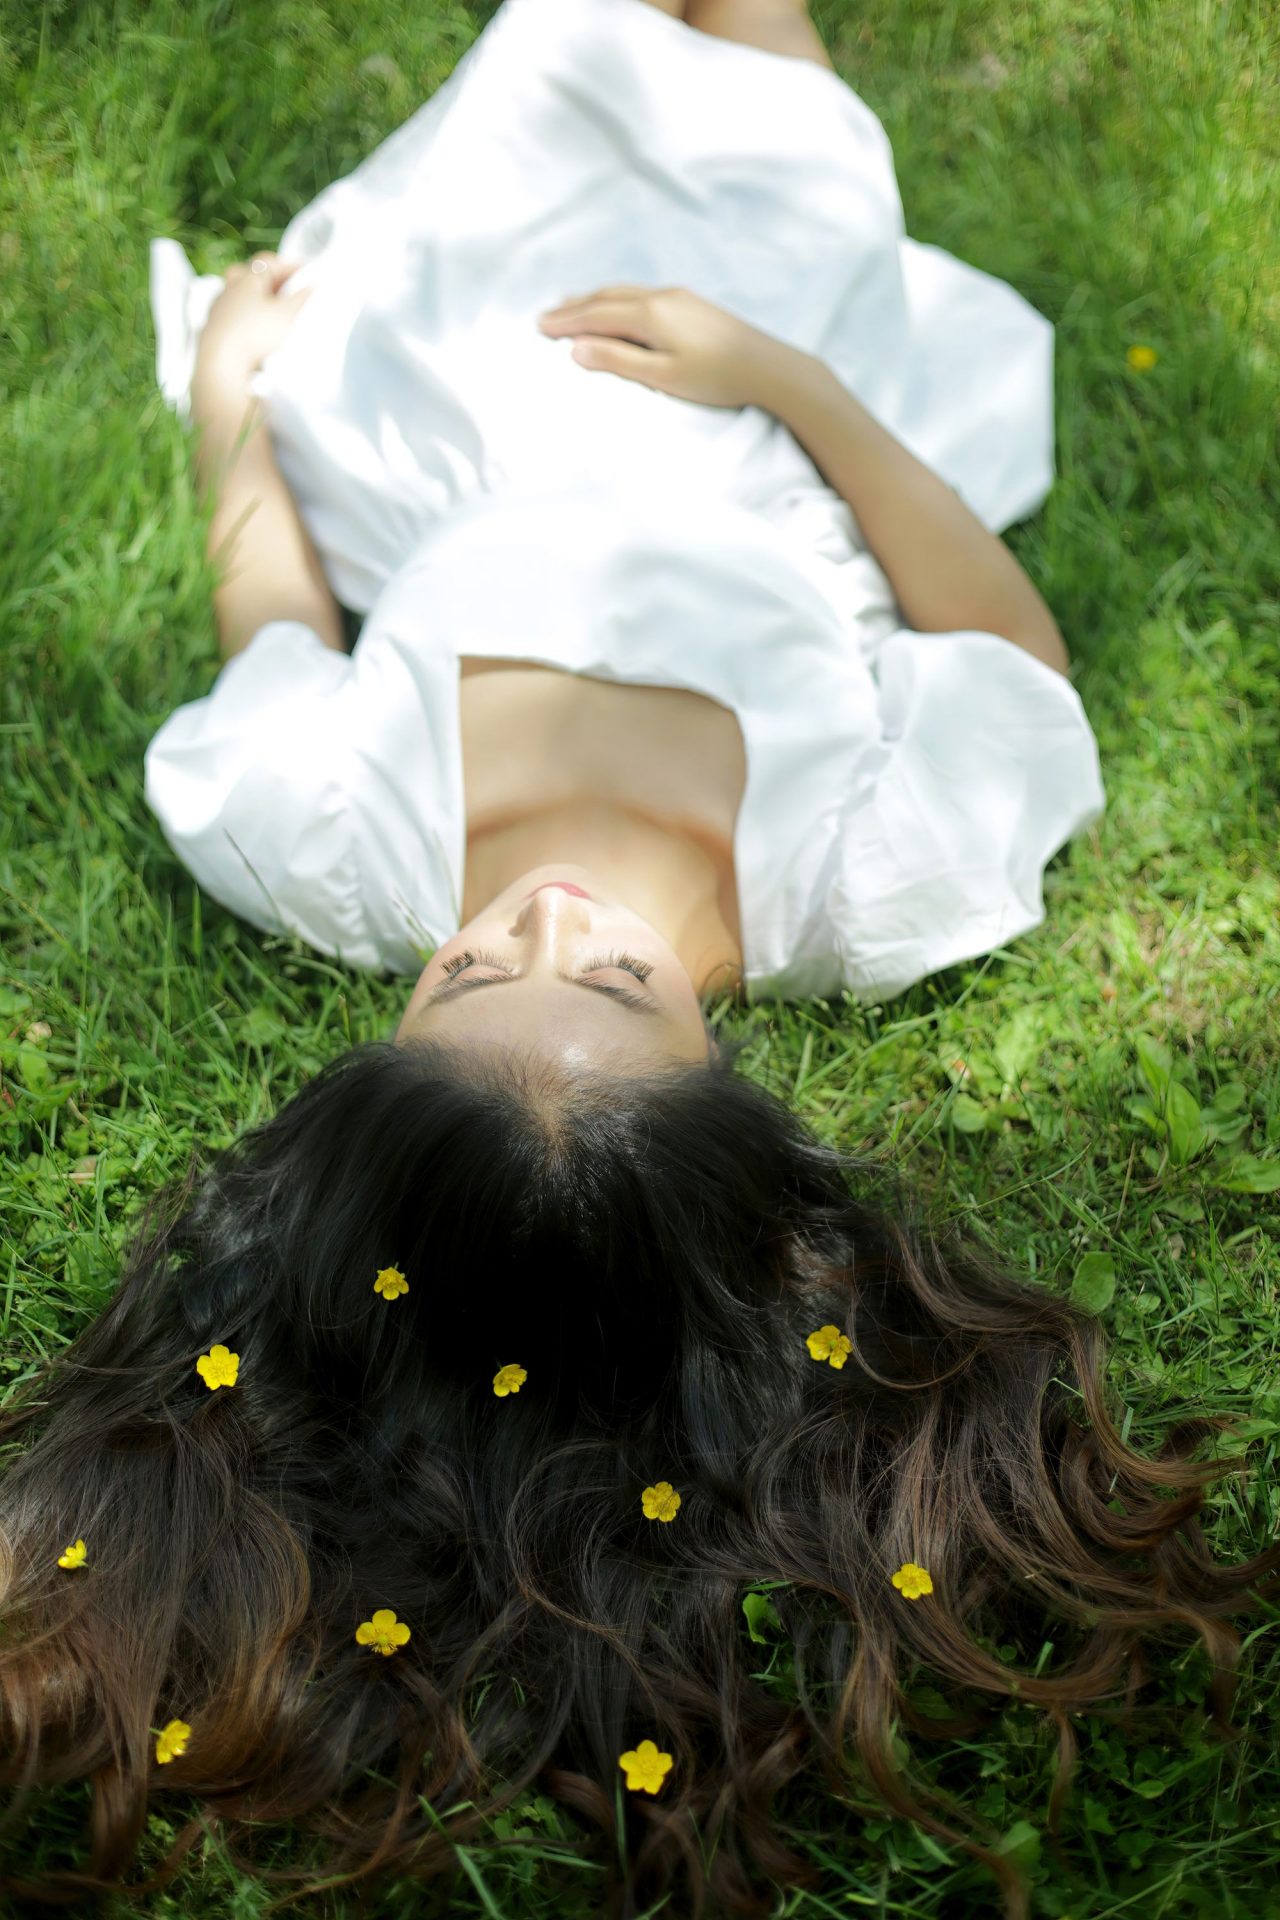 Woman lying in grass with flowers in her hair